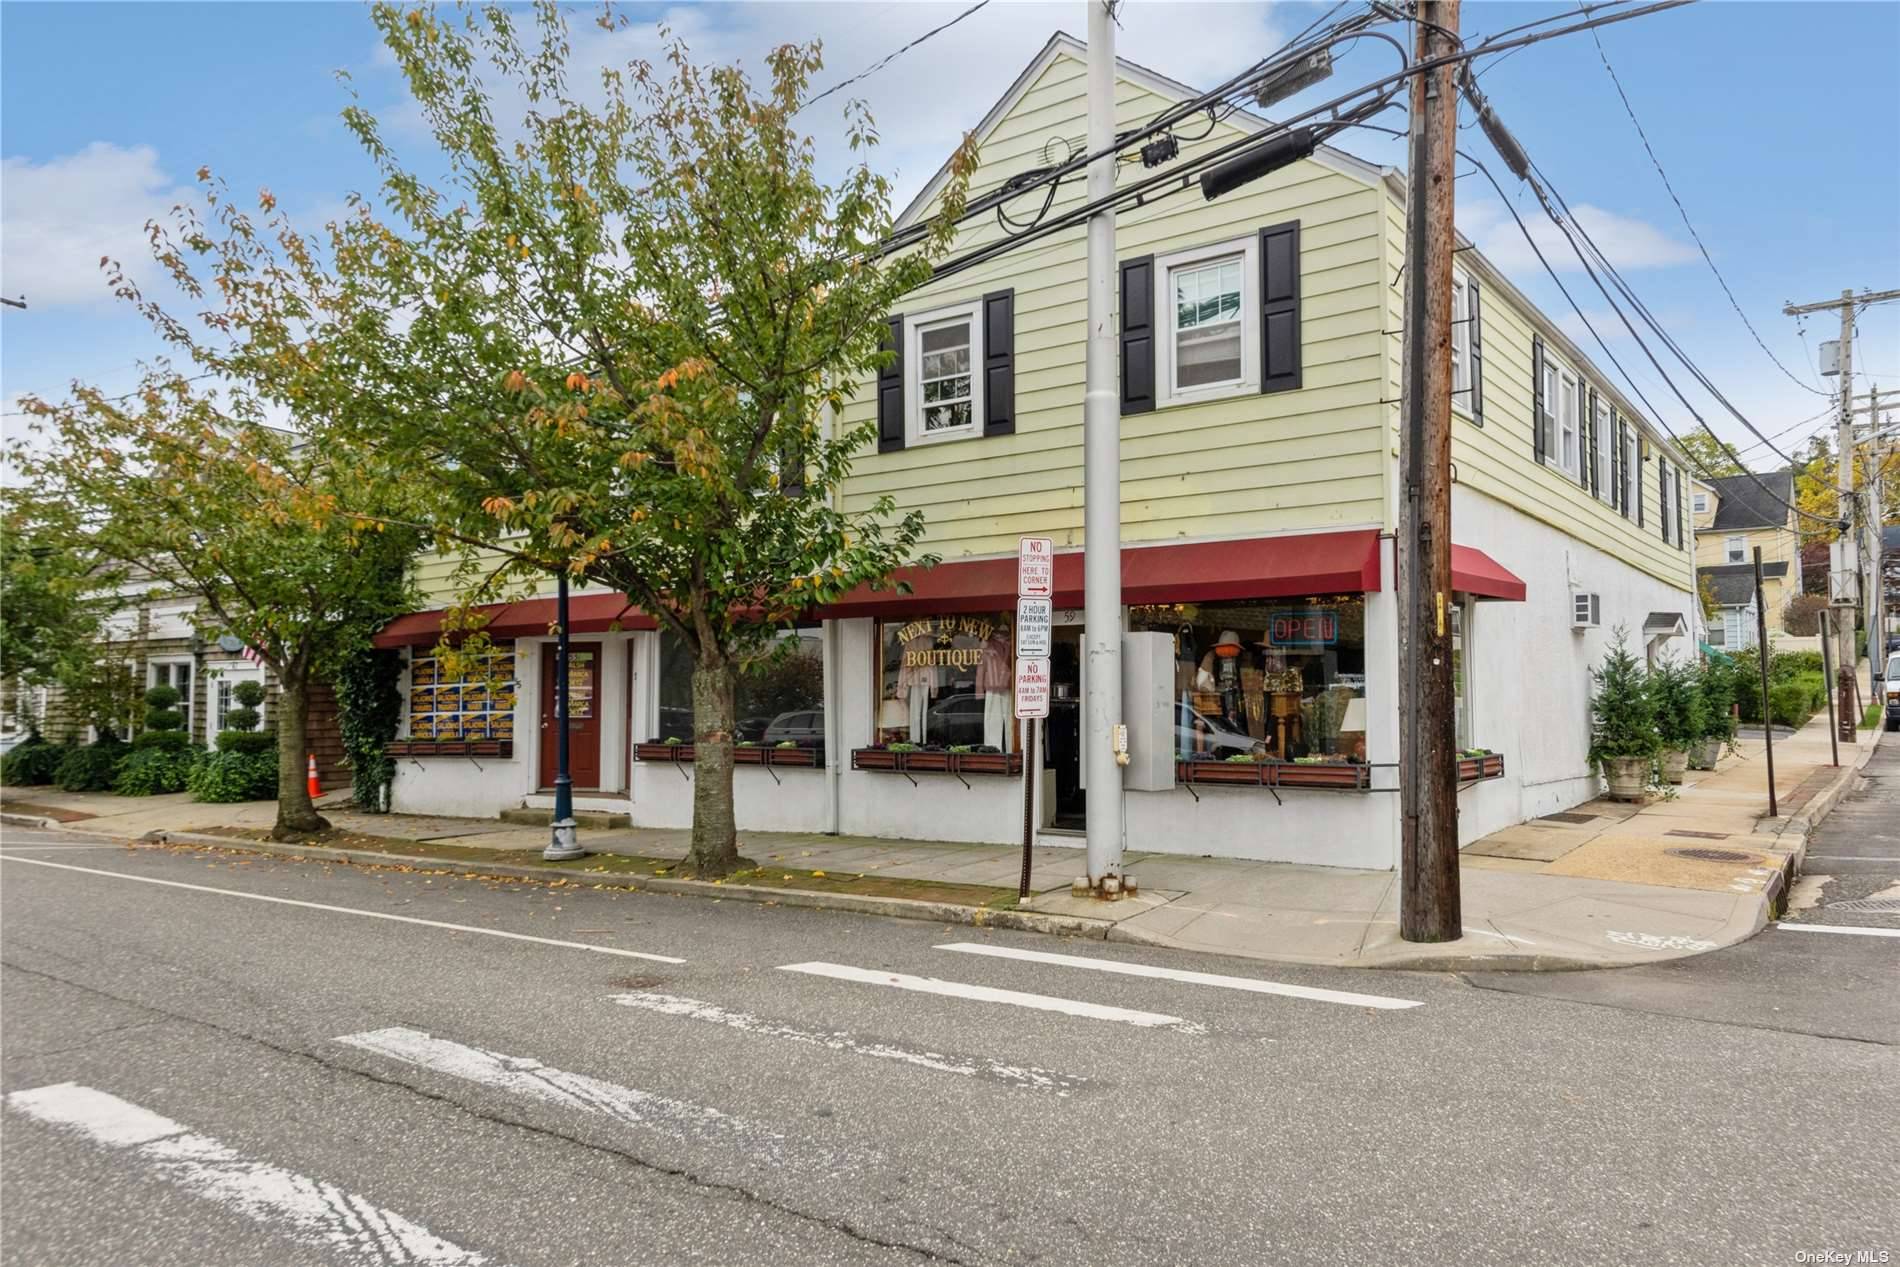 Experience 53 59 West Main Street in the heart of the picturesque town of Oyster Bay, NY.